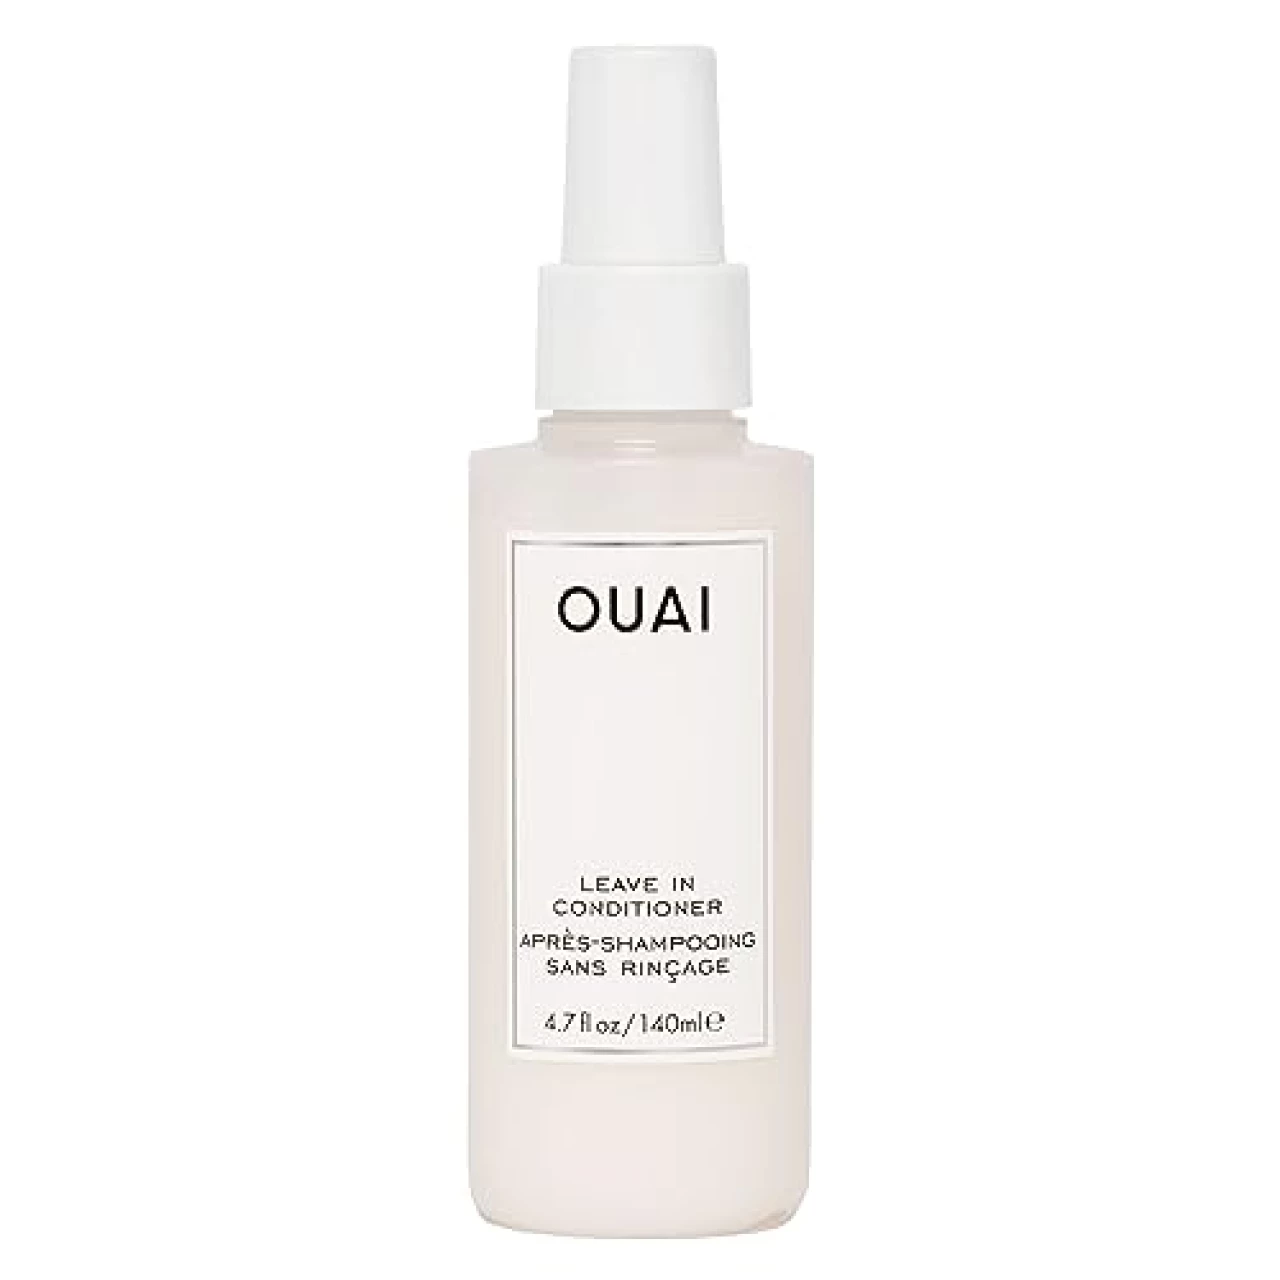 OUAI Leave In Conditioner - Multitasking Heat Protectant Spray for Hair - Prime Hair for Style, Smooth Flyaways, Add Shine &amp; Use as Detangling Spray - No Parabens, Sulfates or Phthalates (4.7 oz)